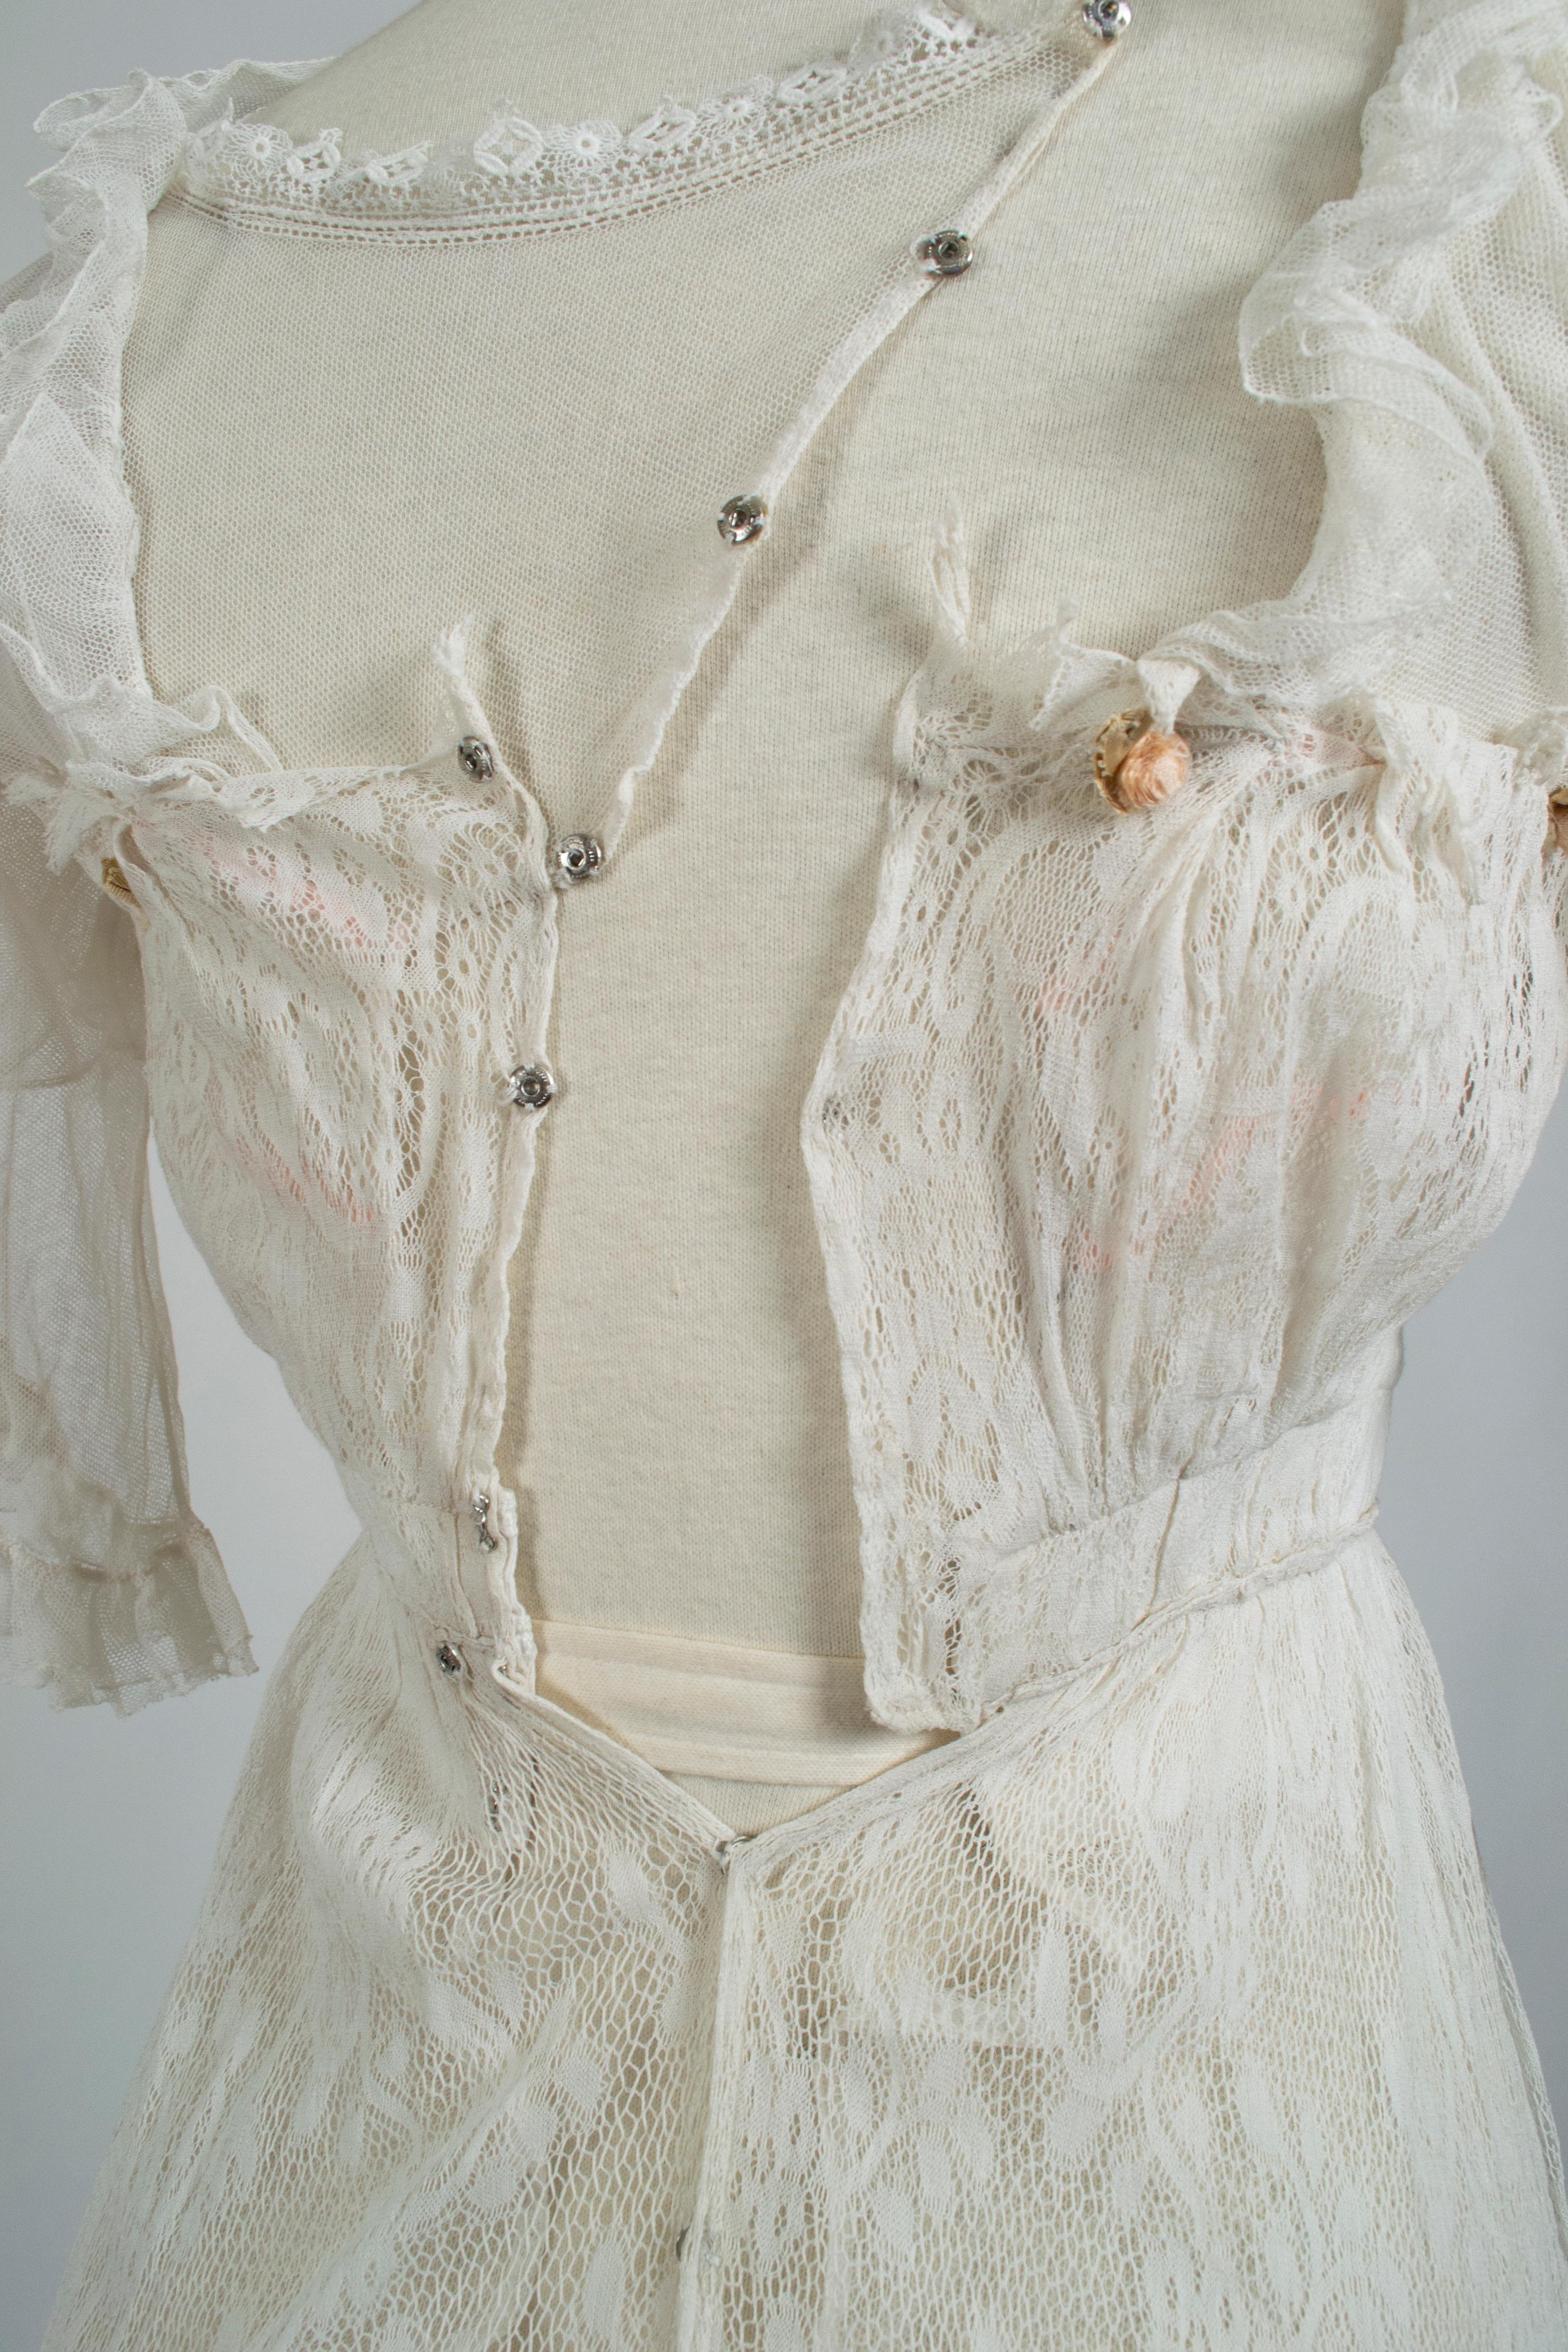 White Edwardian Net Rosebud Afternoon Tea or Bridal Gown - XXS, Early 1900s For Sale 1